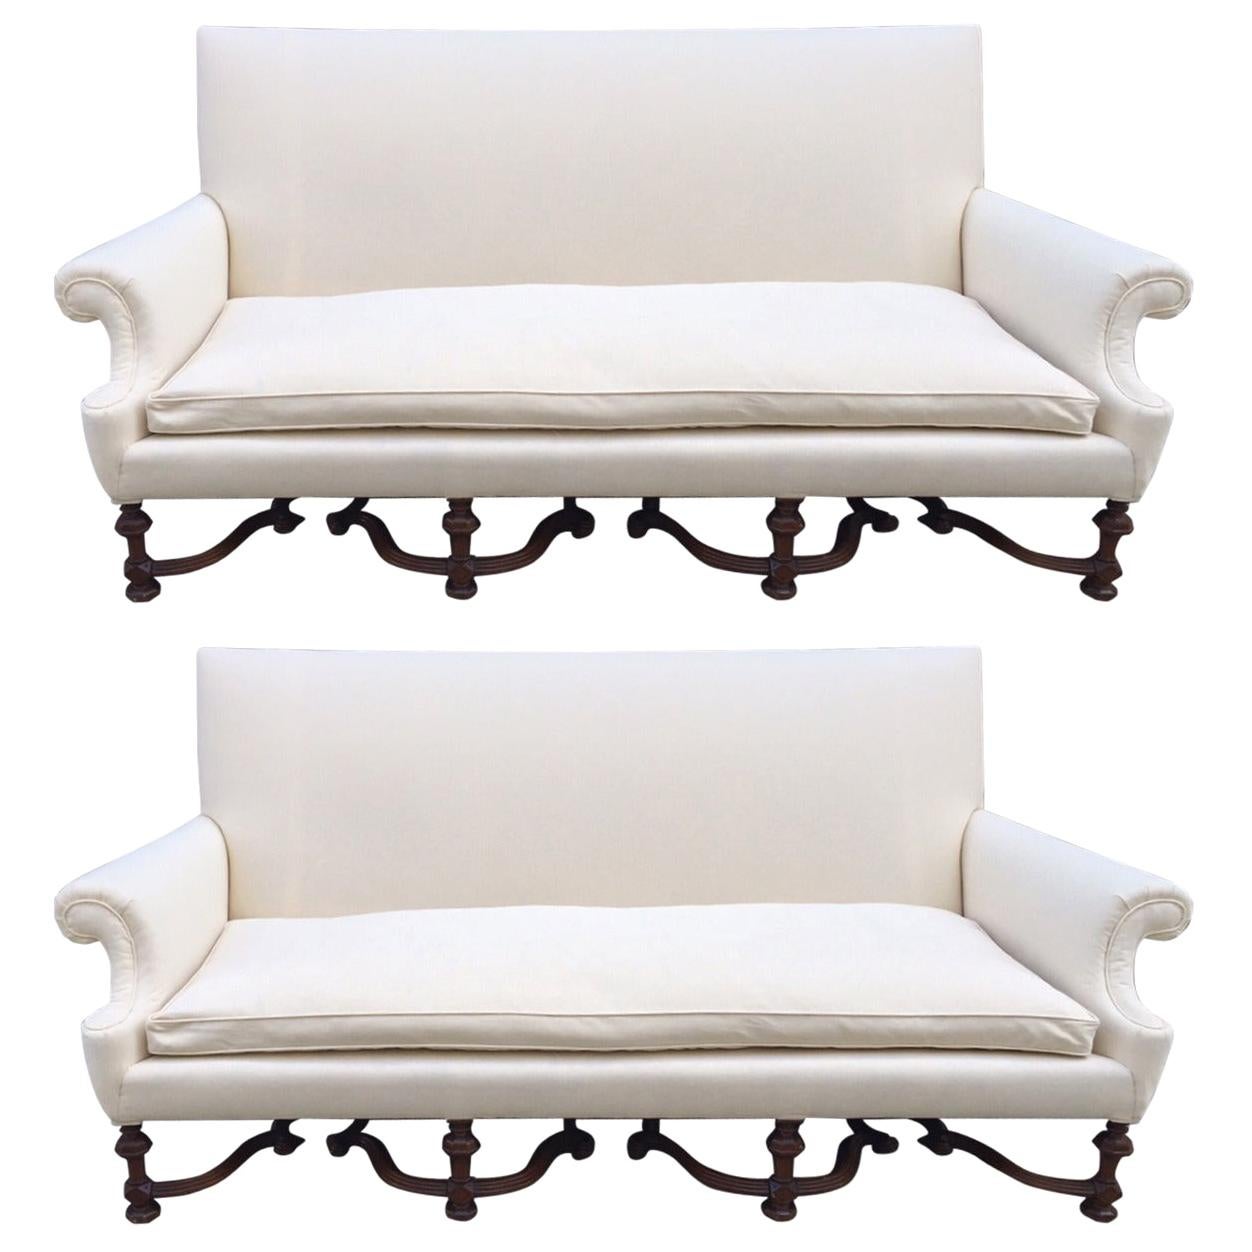 Pair of English High Back Antique Walnut Sofas in Linen